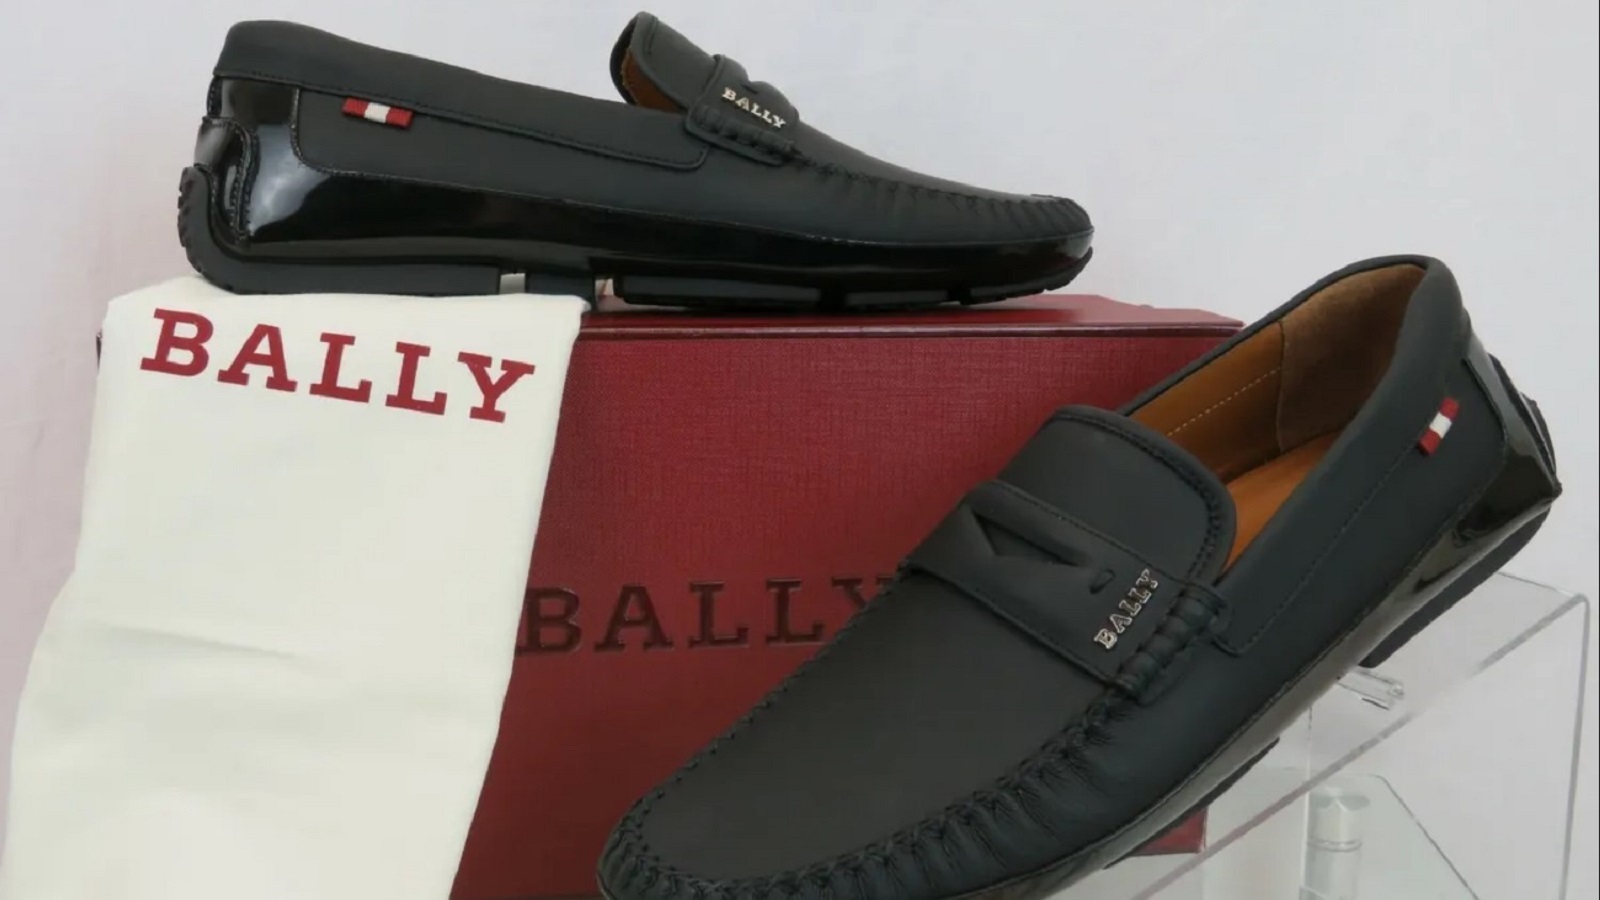 Bally Shoes Review: *Pros and Cons* Are They Worth the Price?